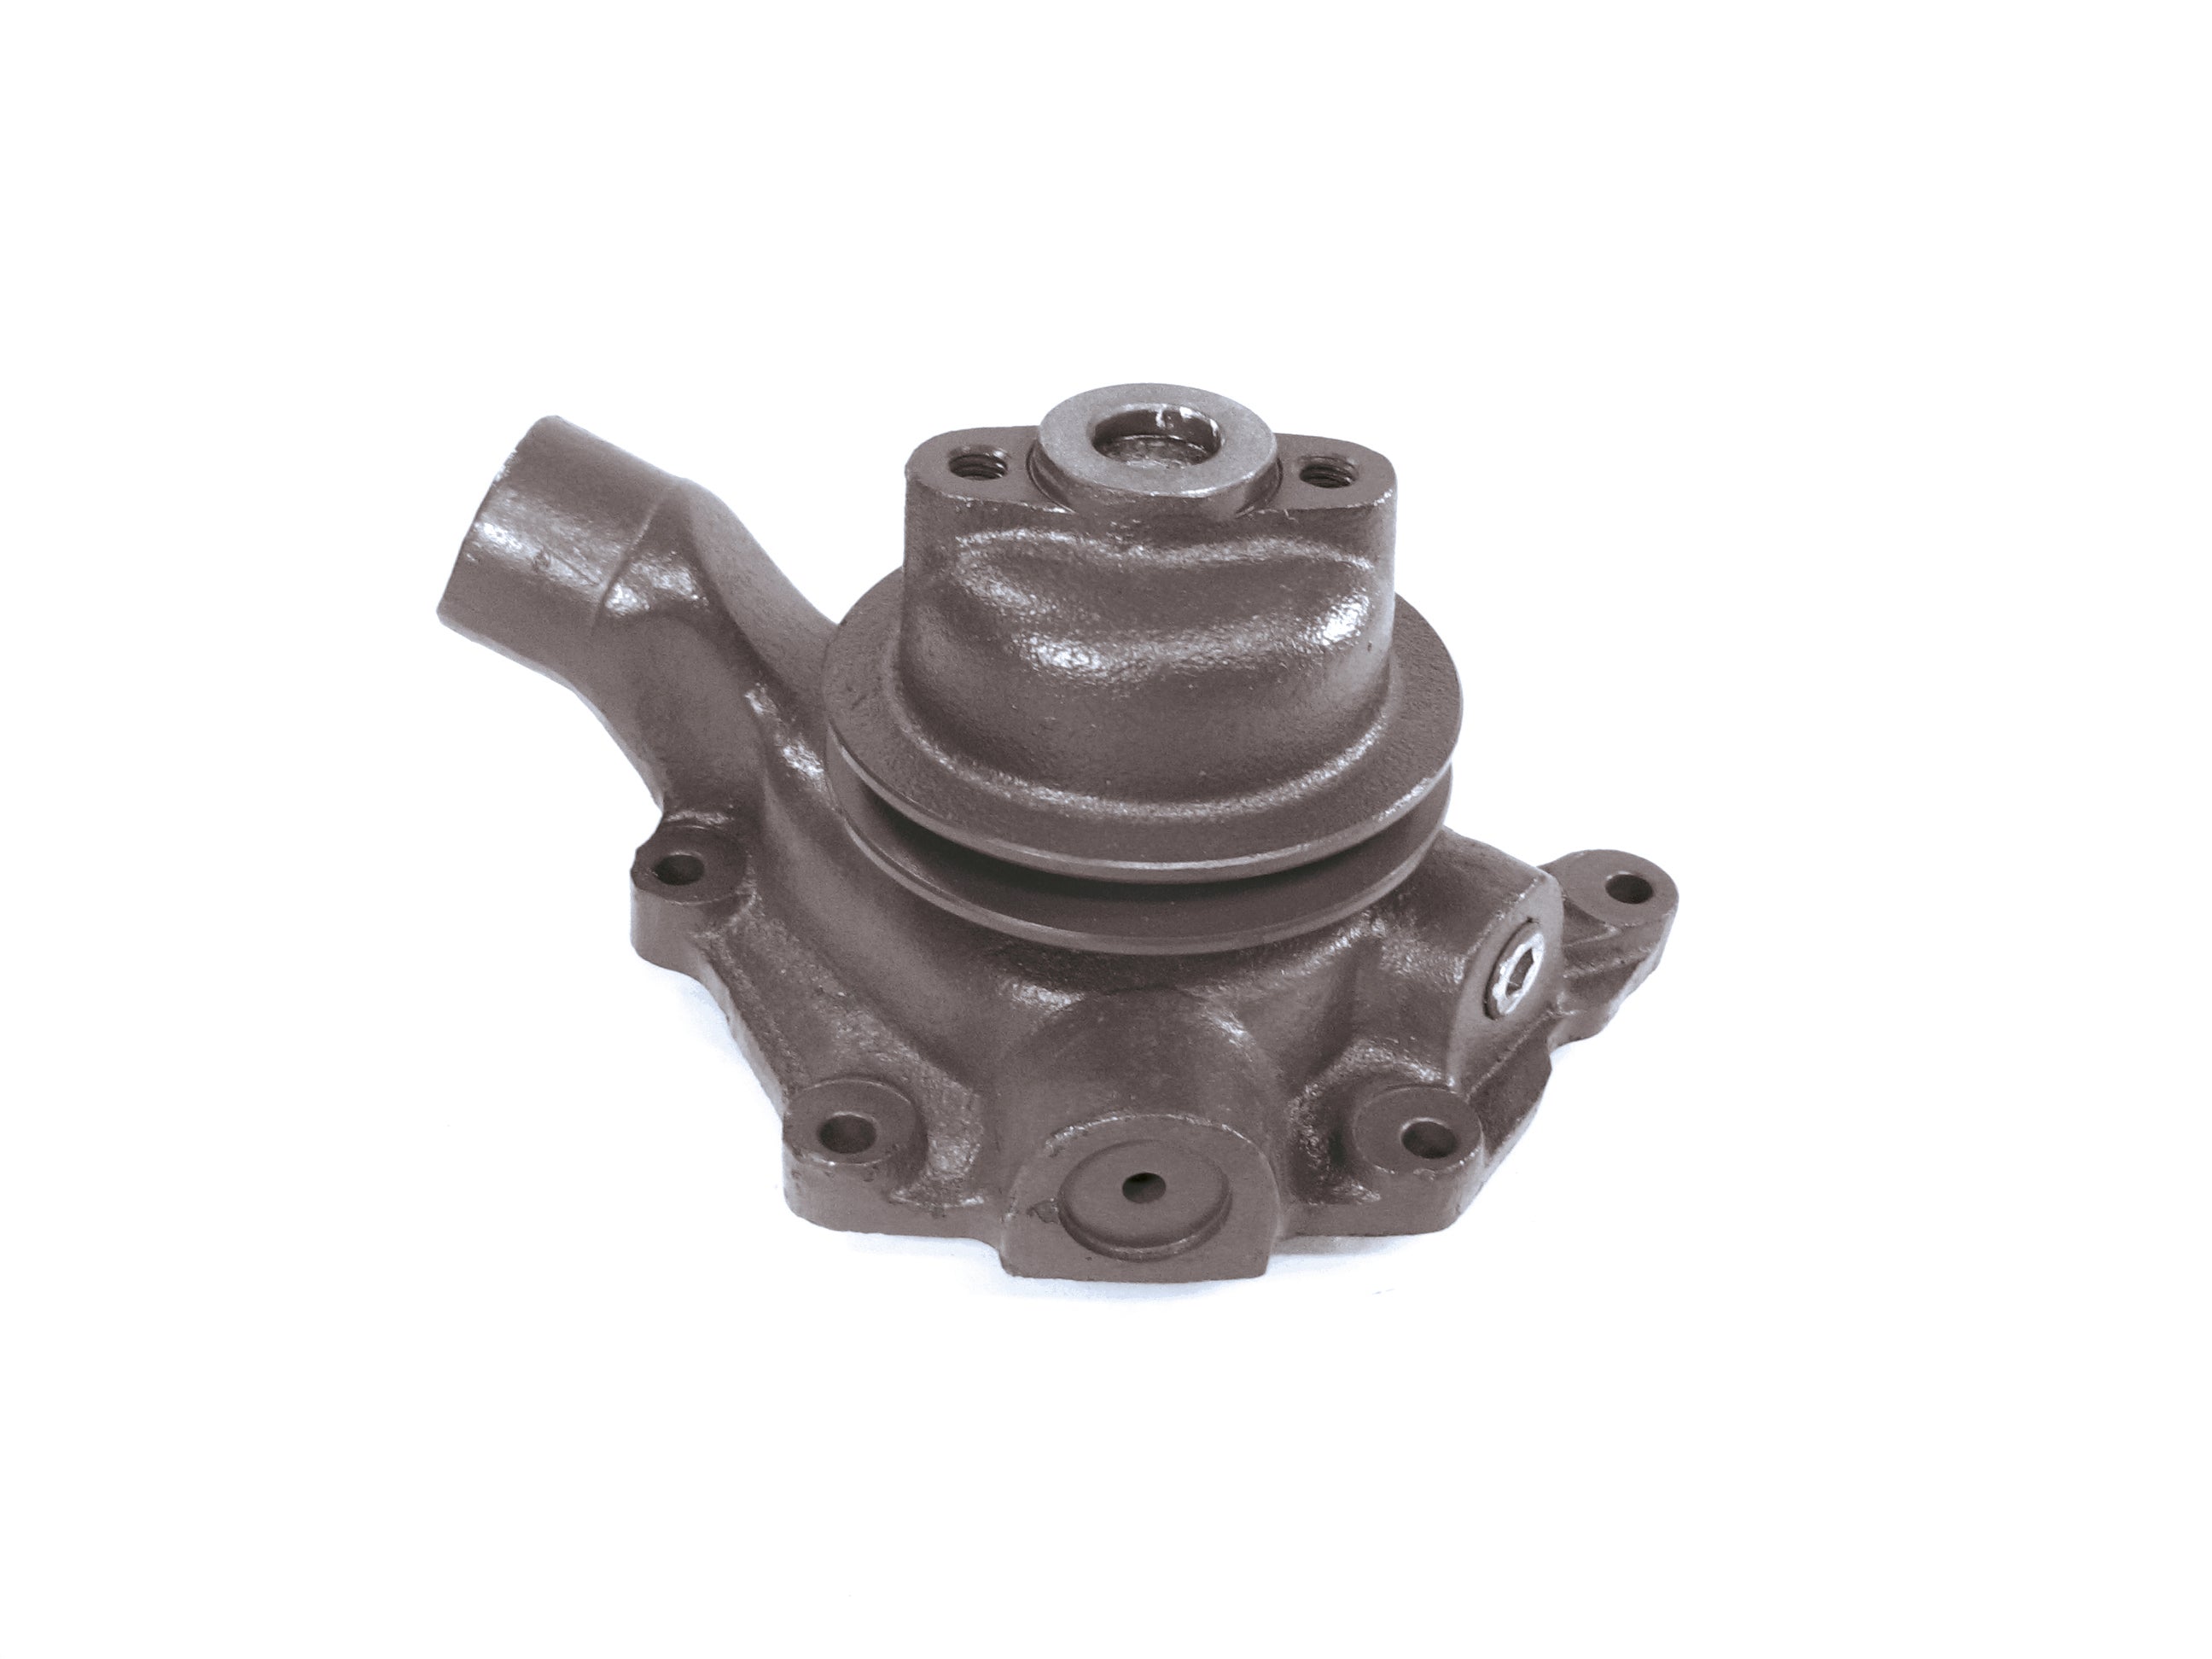 Water Pump Replacement for CASE IH 1594 1690 K200759 K262962